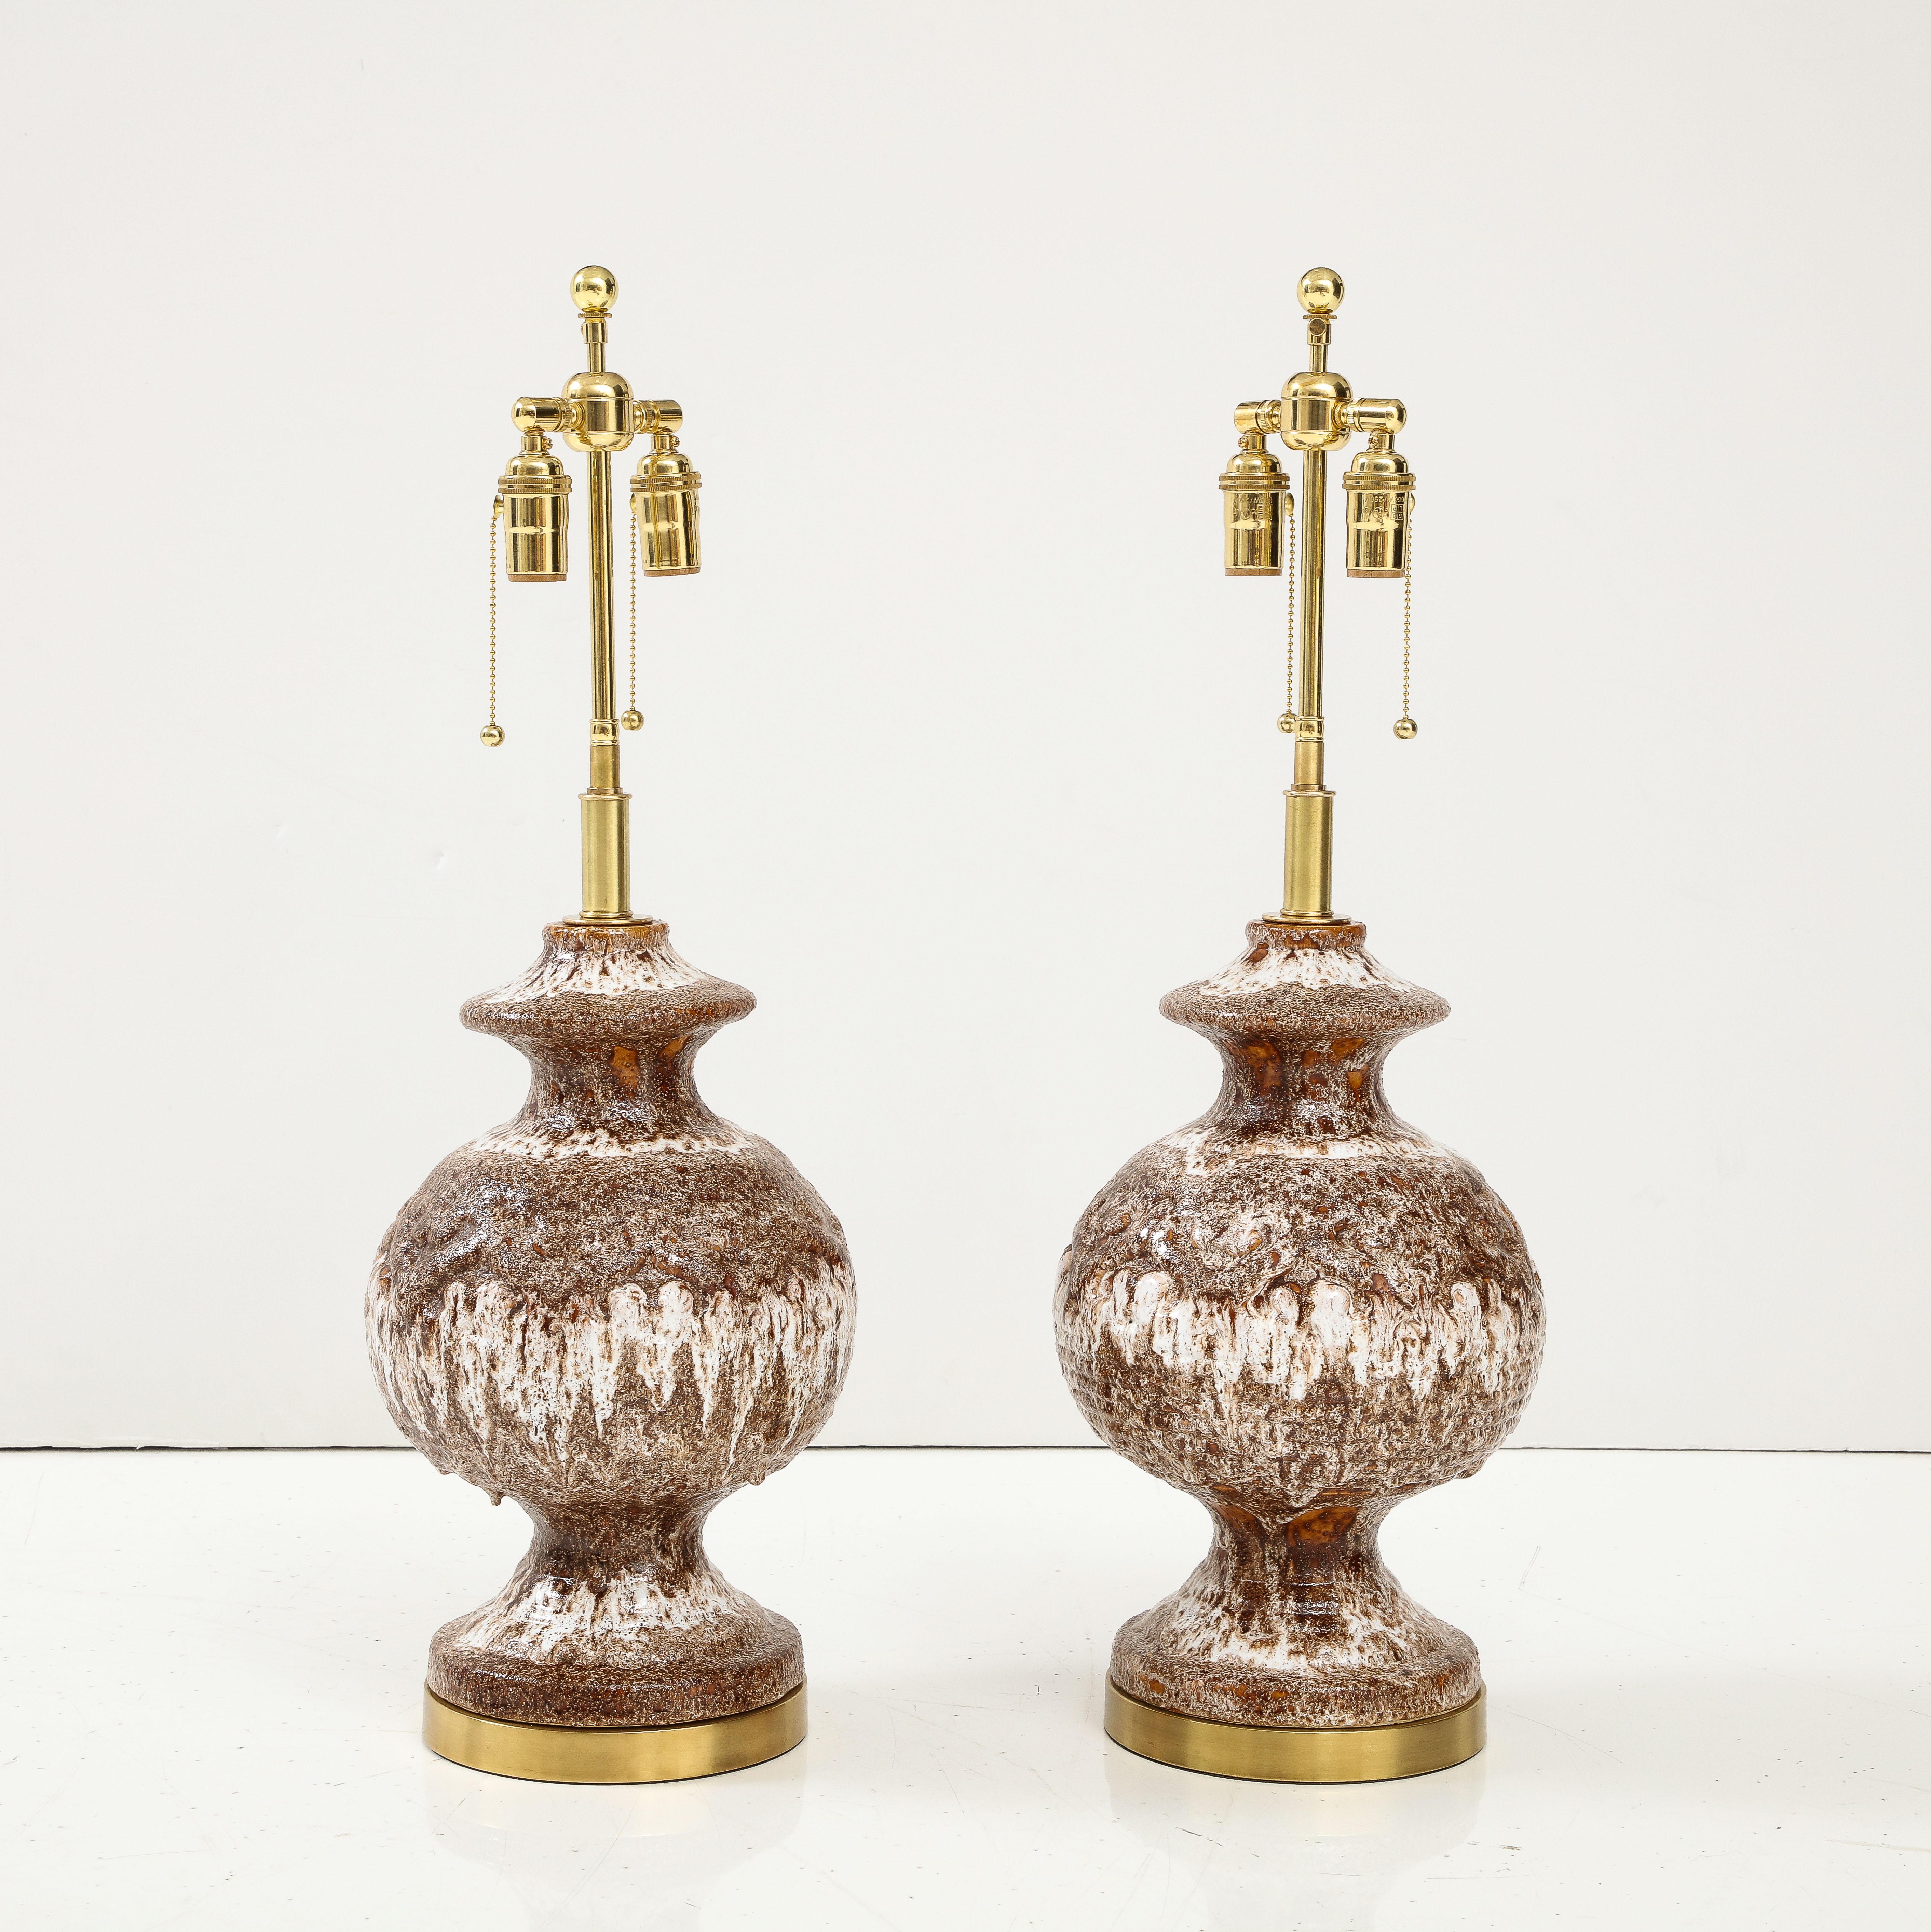 Pair of Large West German ceramic lamps with a wonderful textured lava glaze.
The lamps sit on Brass bases and they have been Newly rewired with adjustable polished brass double clusters that take standard size light bulbs and silk rayon cords.
Each